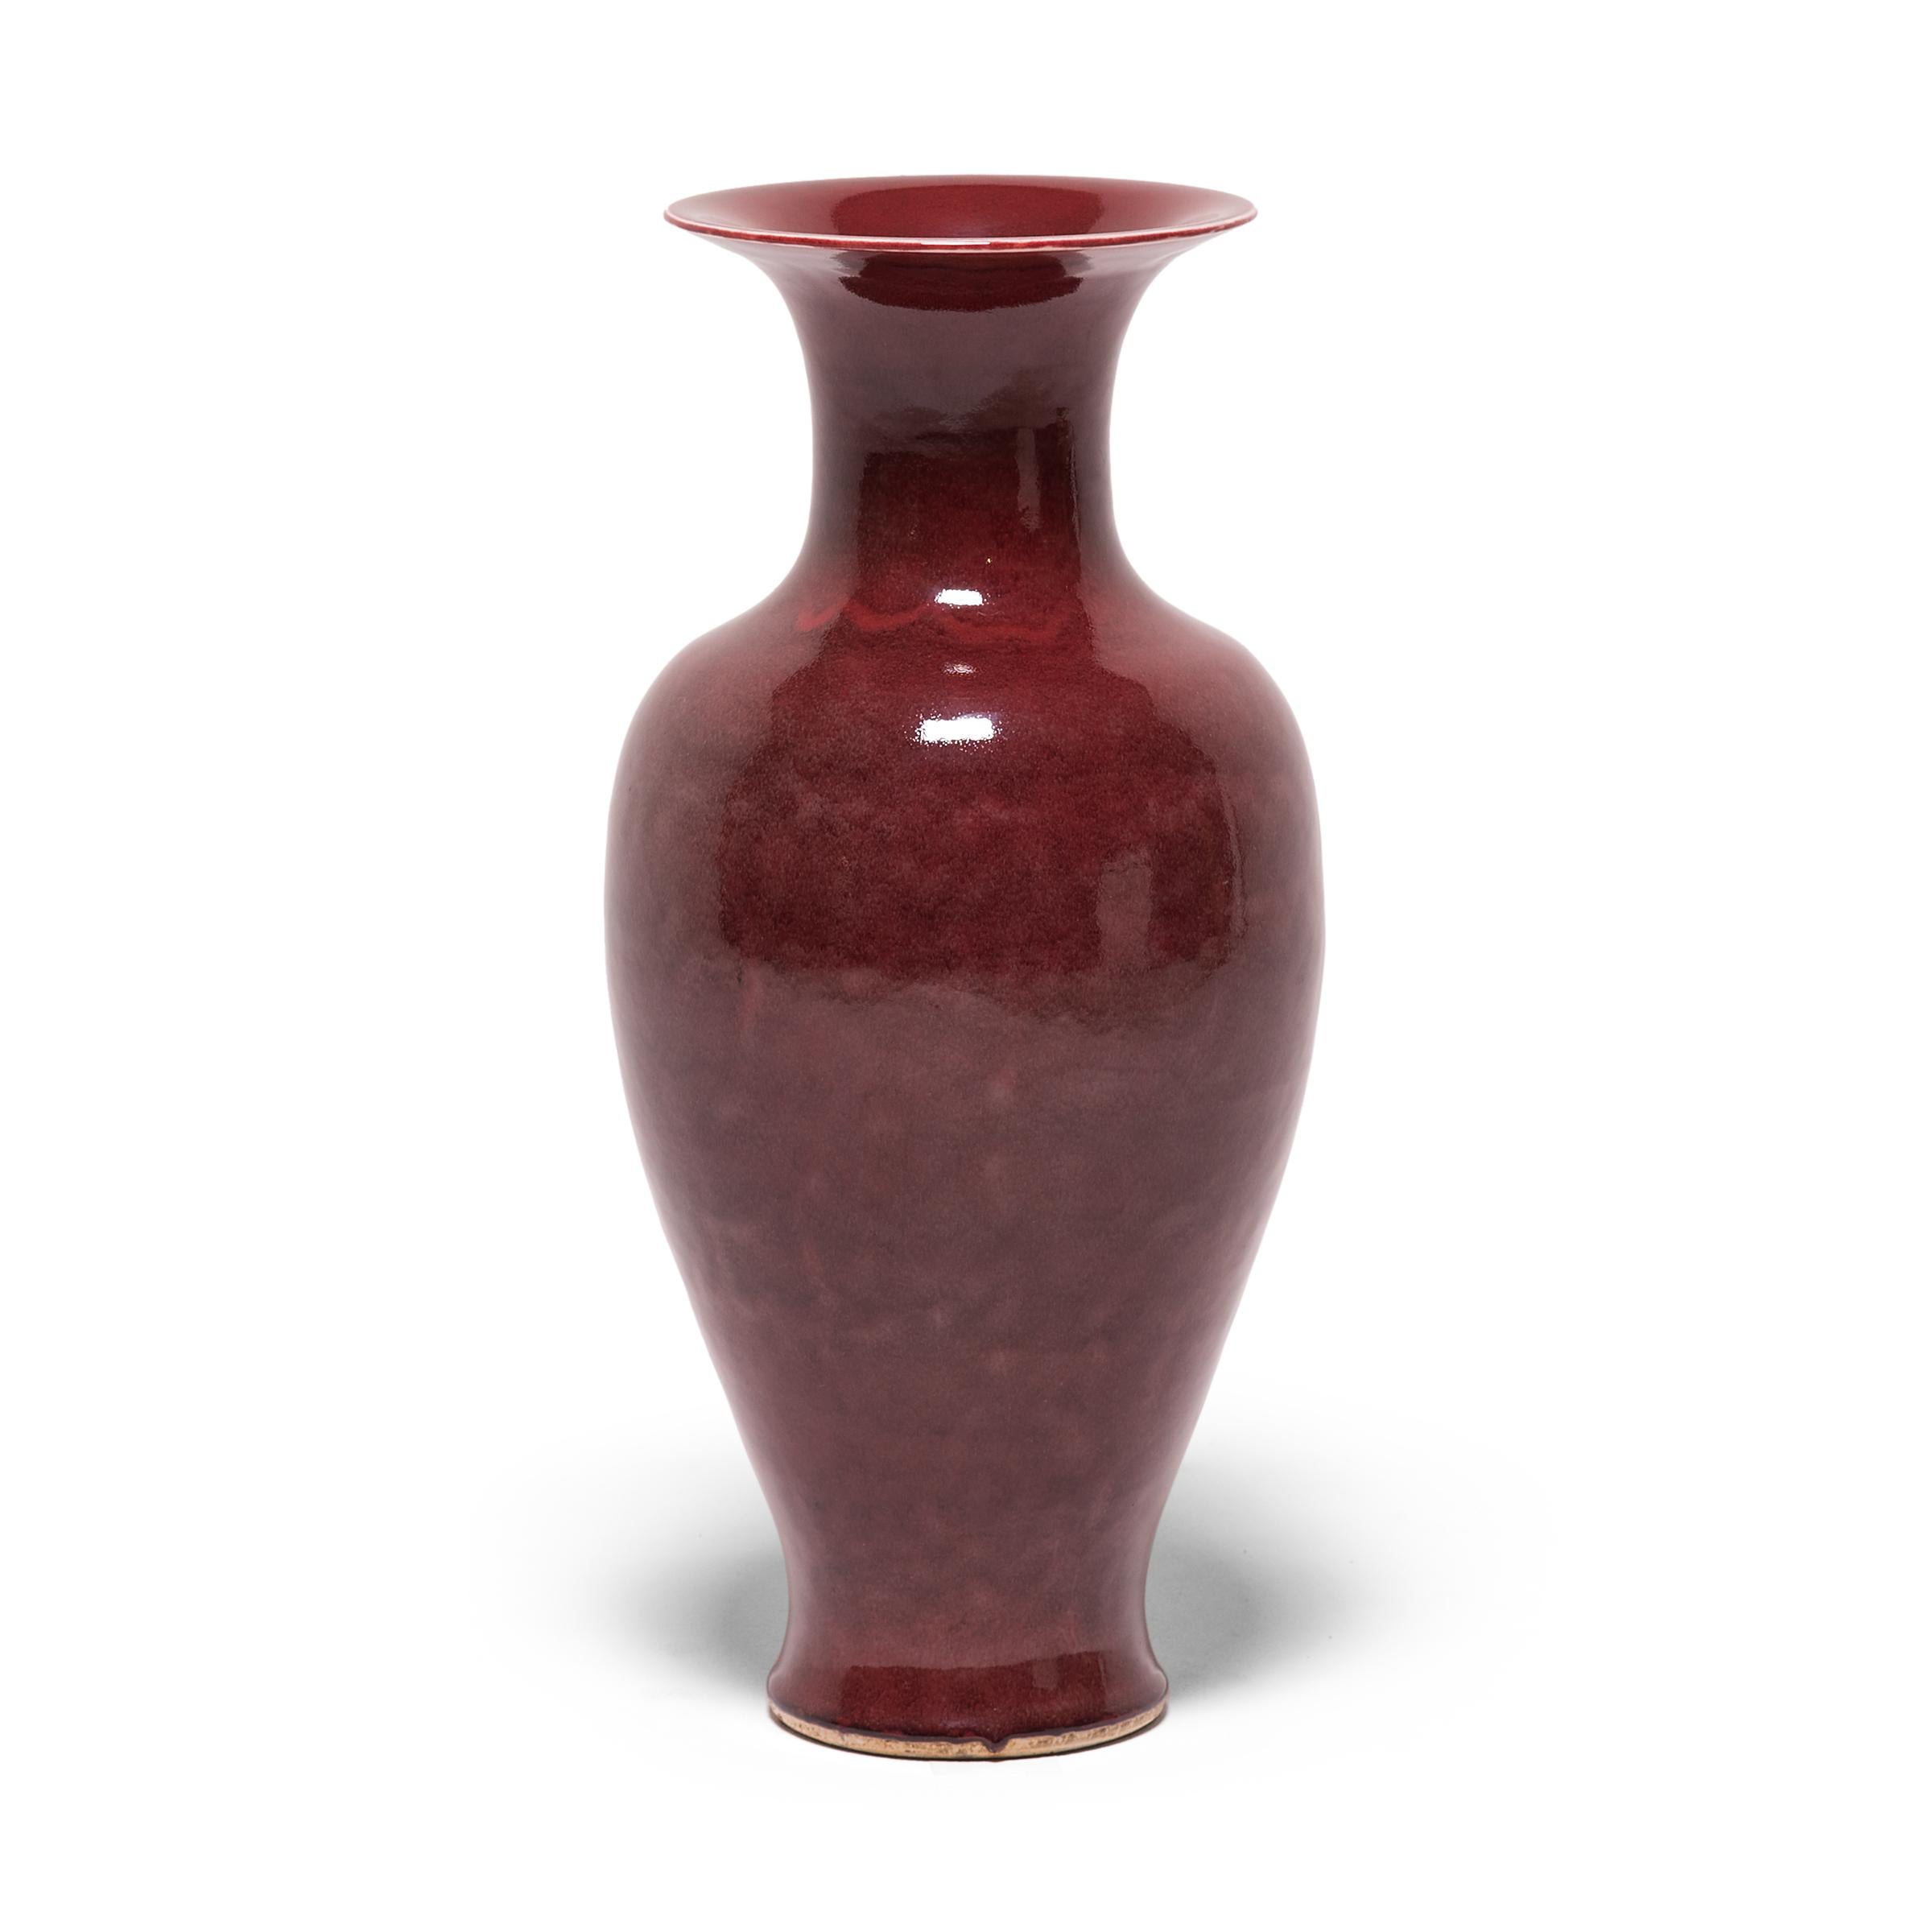 A reactive oxblood glaze coats this traditional fantail-shaped vase in eye-catching swirls of rich red. Compared to the color of crushed strawberries, red wine, or dried blood, the glaze contains large amounts of copper, which can be unpredictable